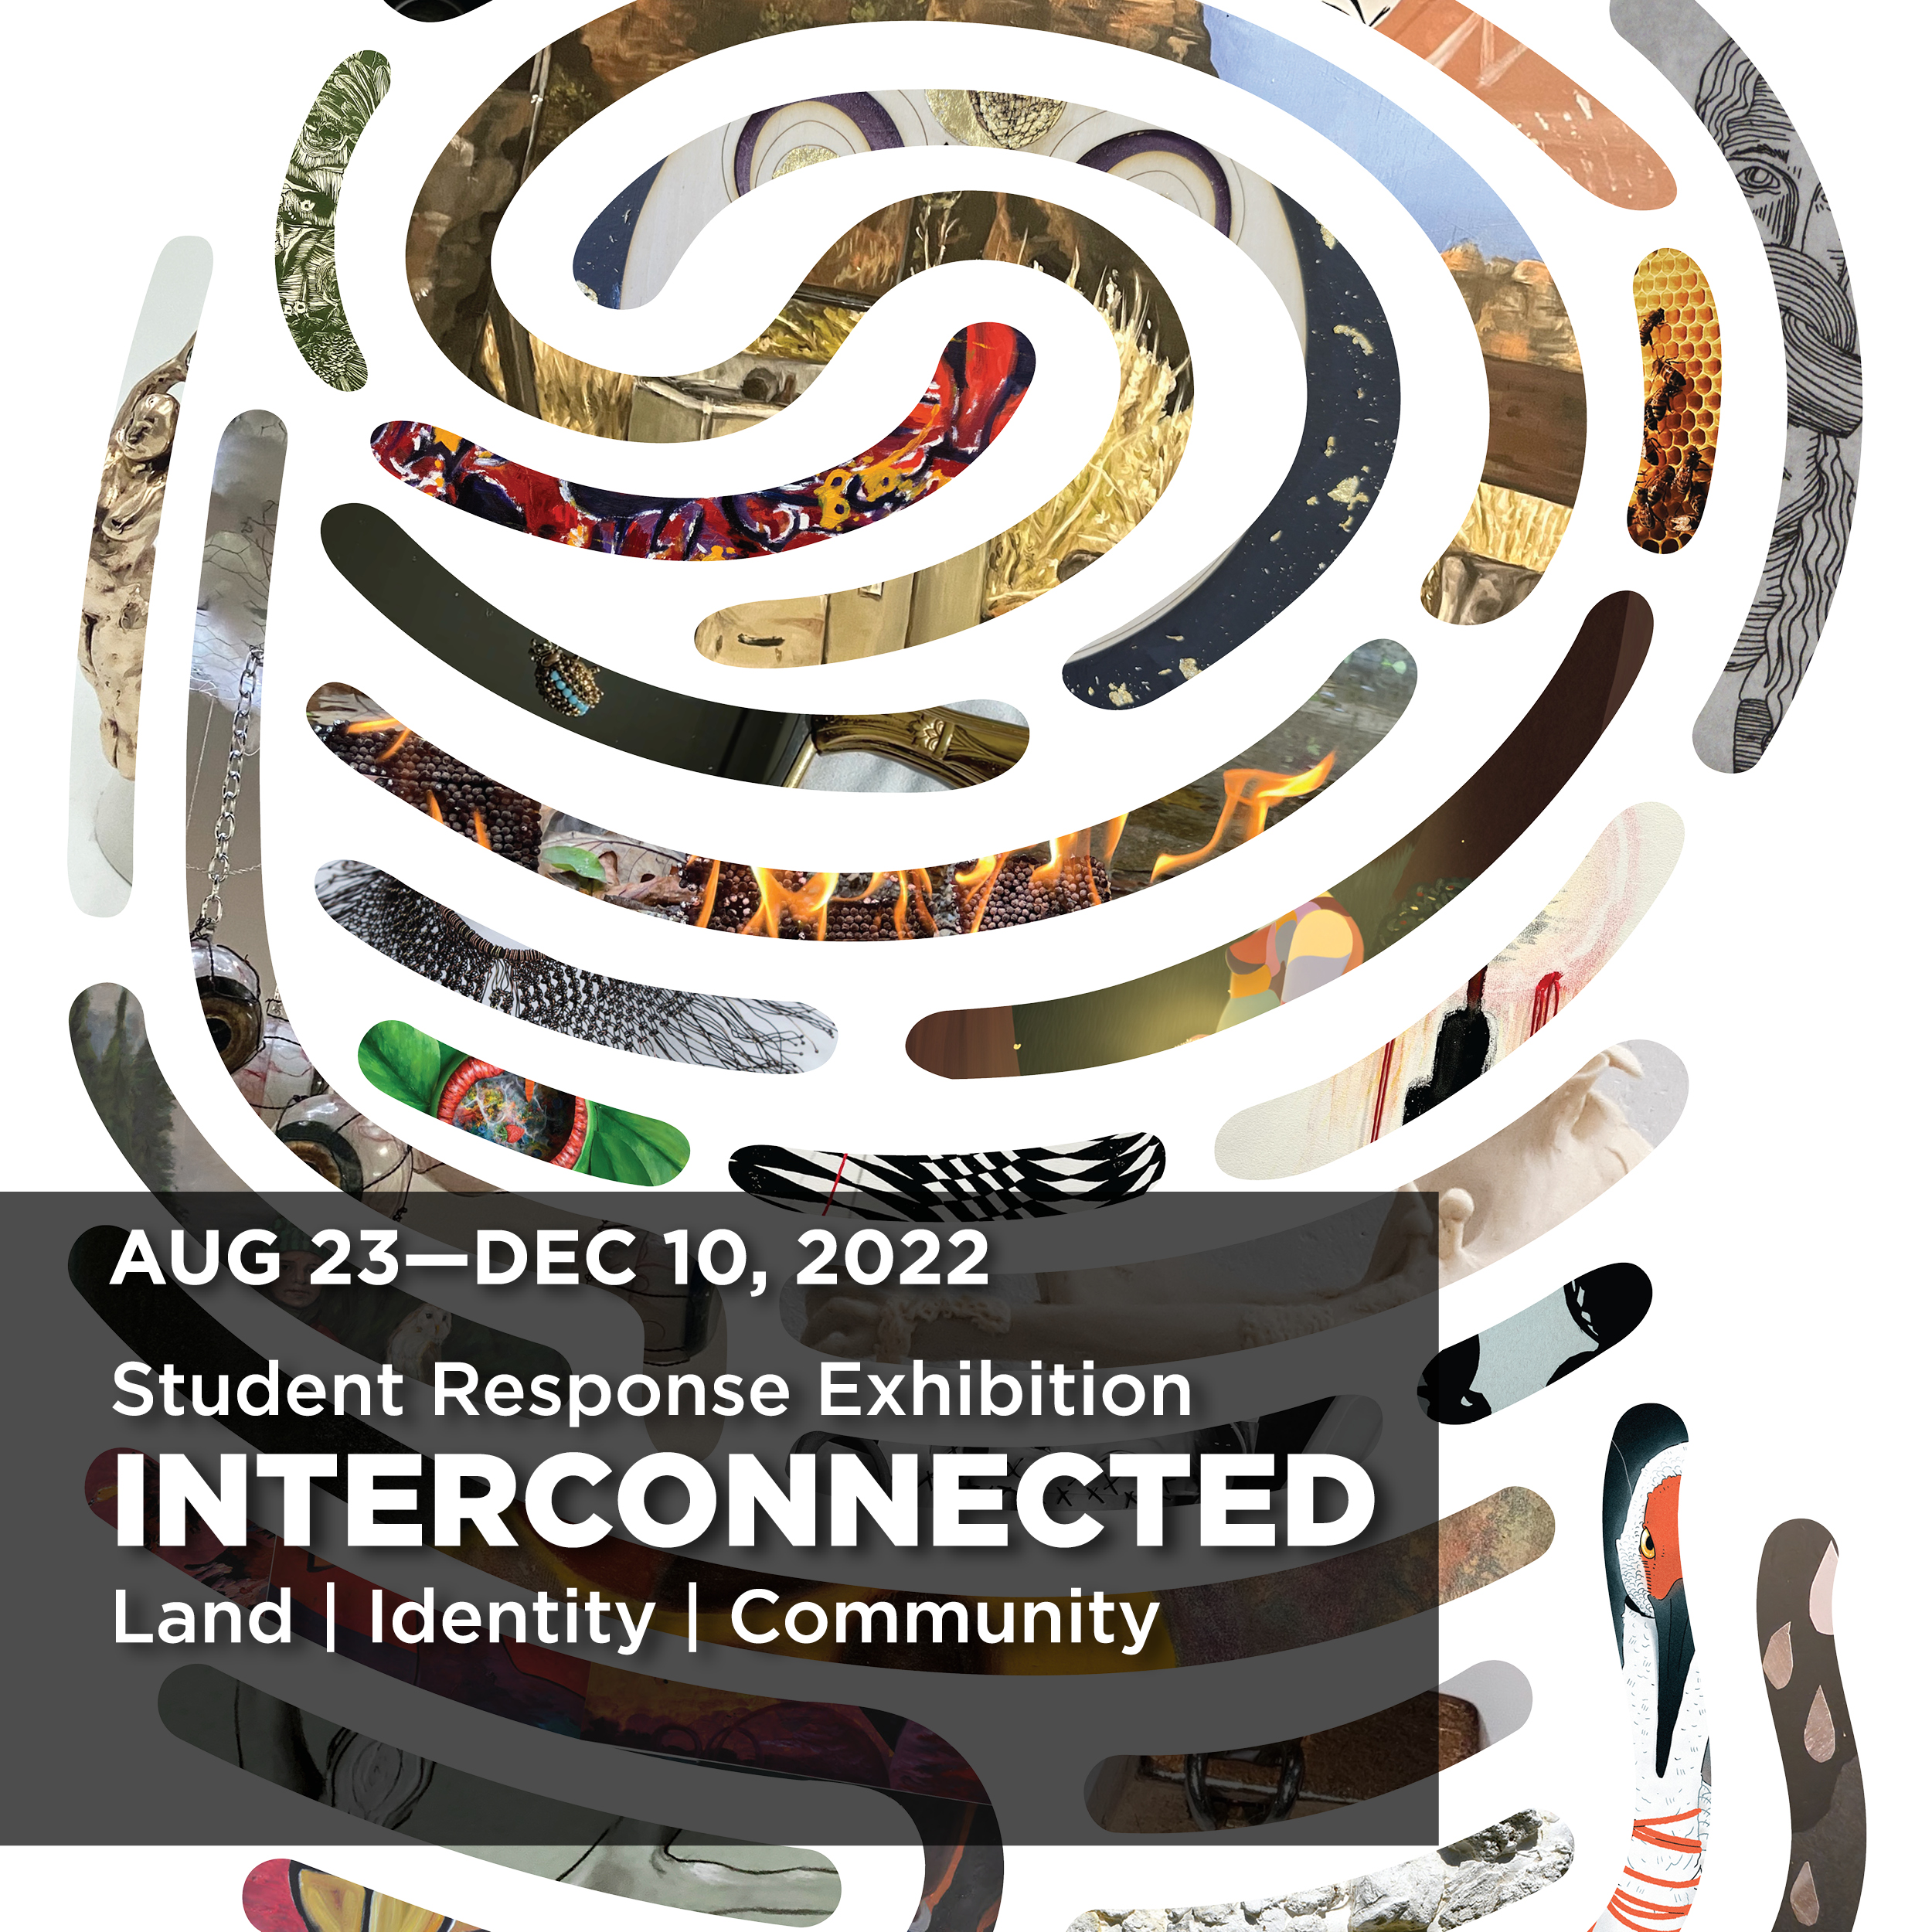 Poster image for the exhibition Interconnected: Land | Identity | Community (A Student Response) on display August 23, 2022 to December 10, 2022